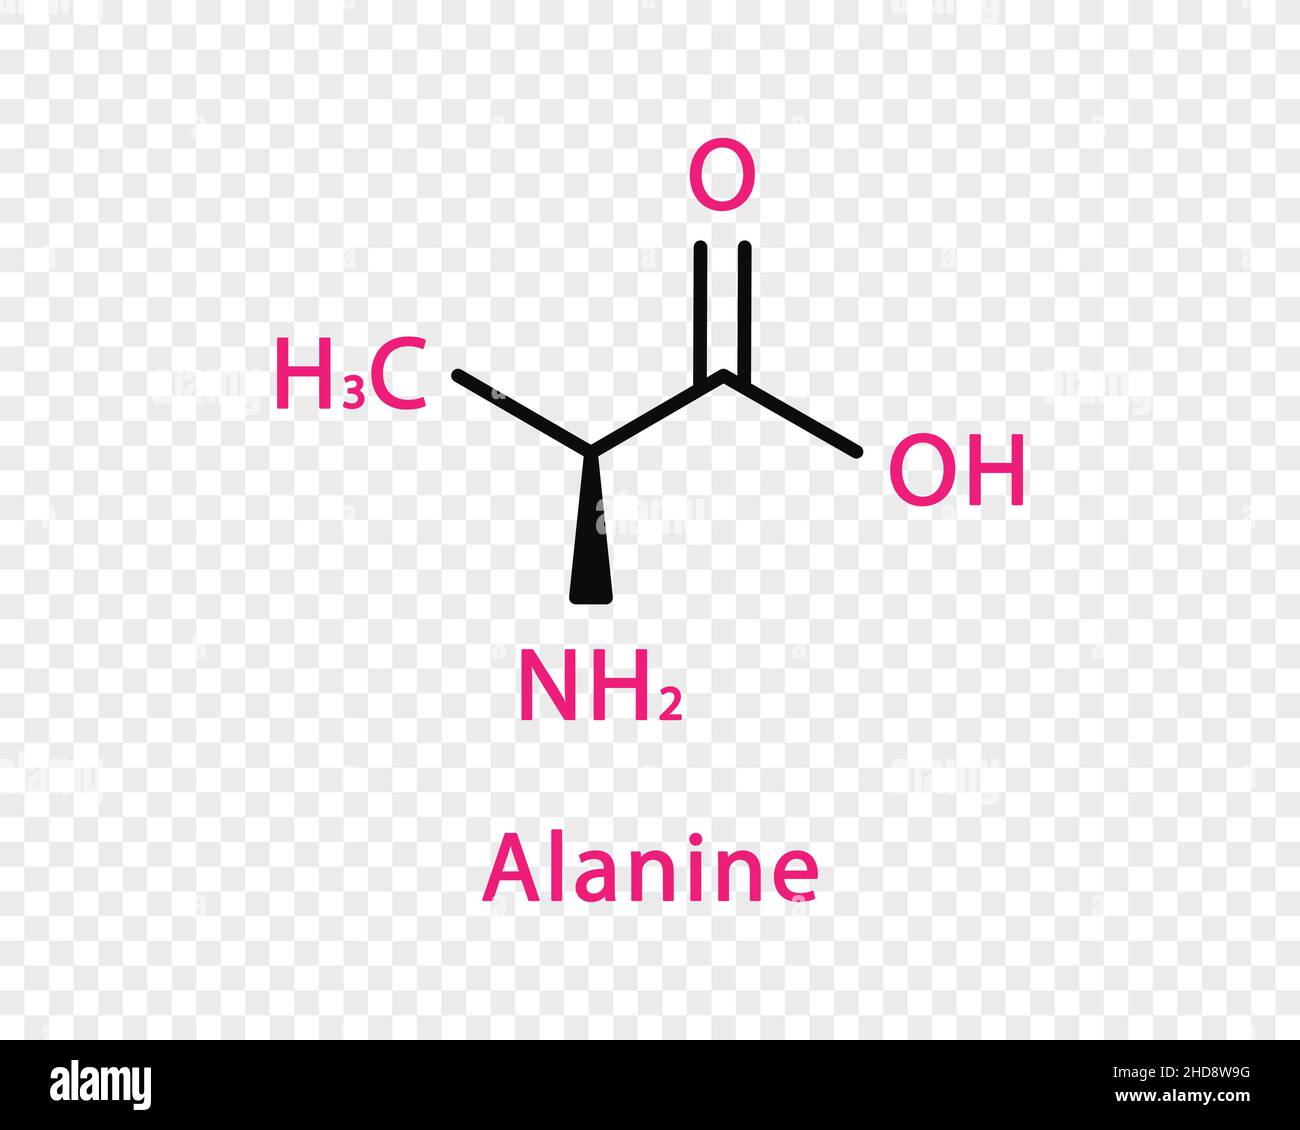 Alanine chemical formula. Alanine structural chemical formula isolated on transparent background. Stock Vector